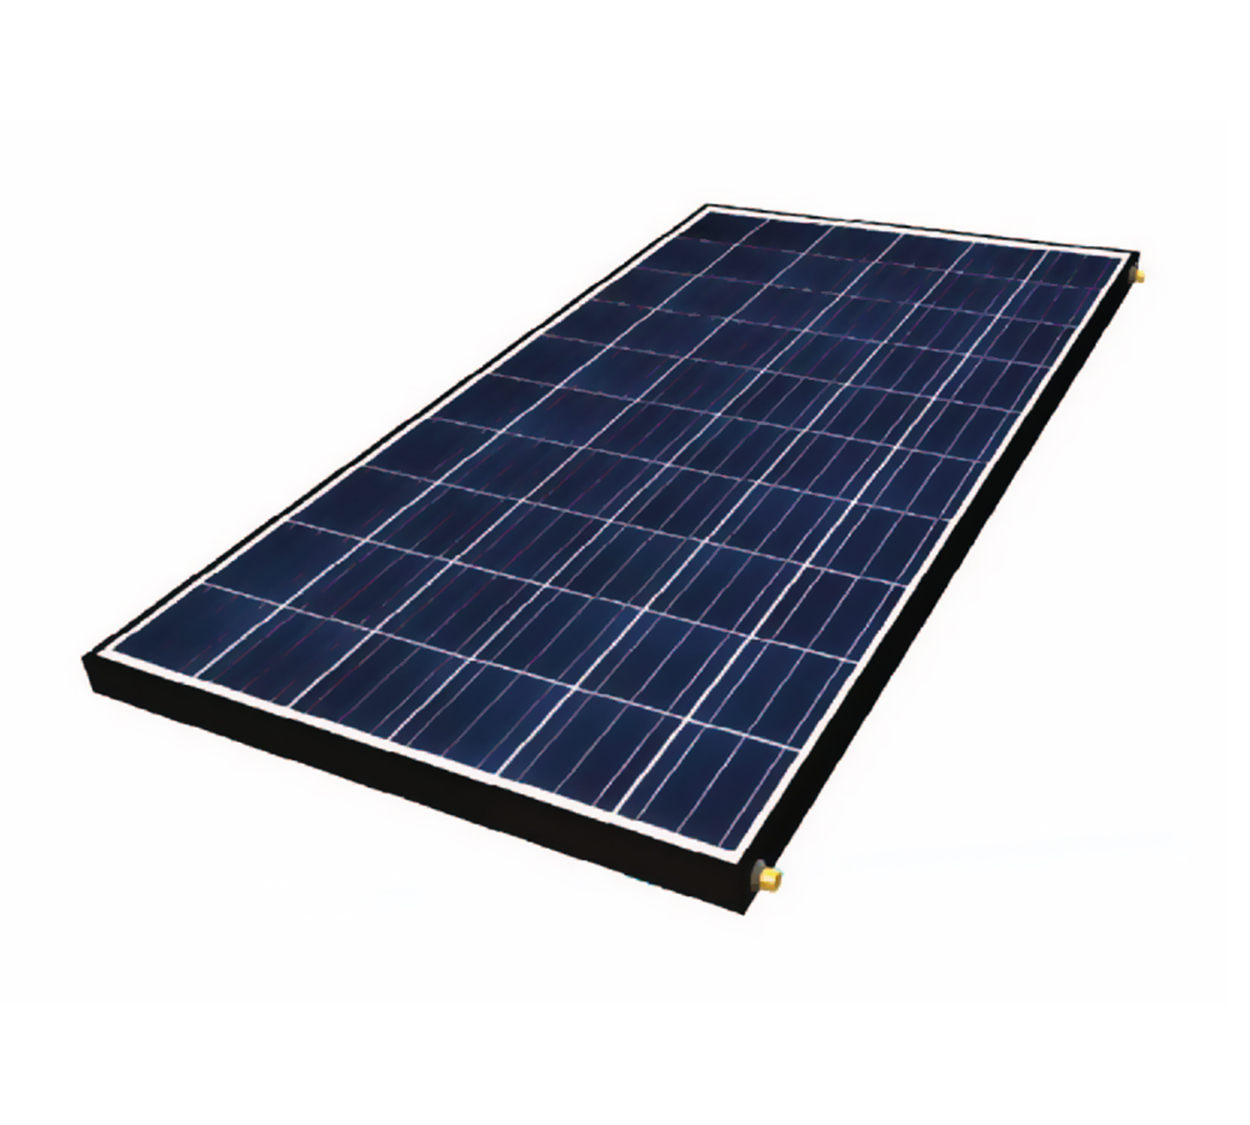 Solar PV-T Panels: Combining Solar Electricity and Thermal Energy